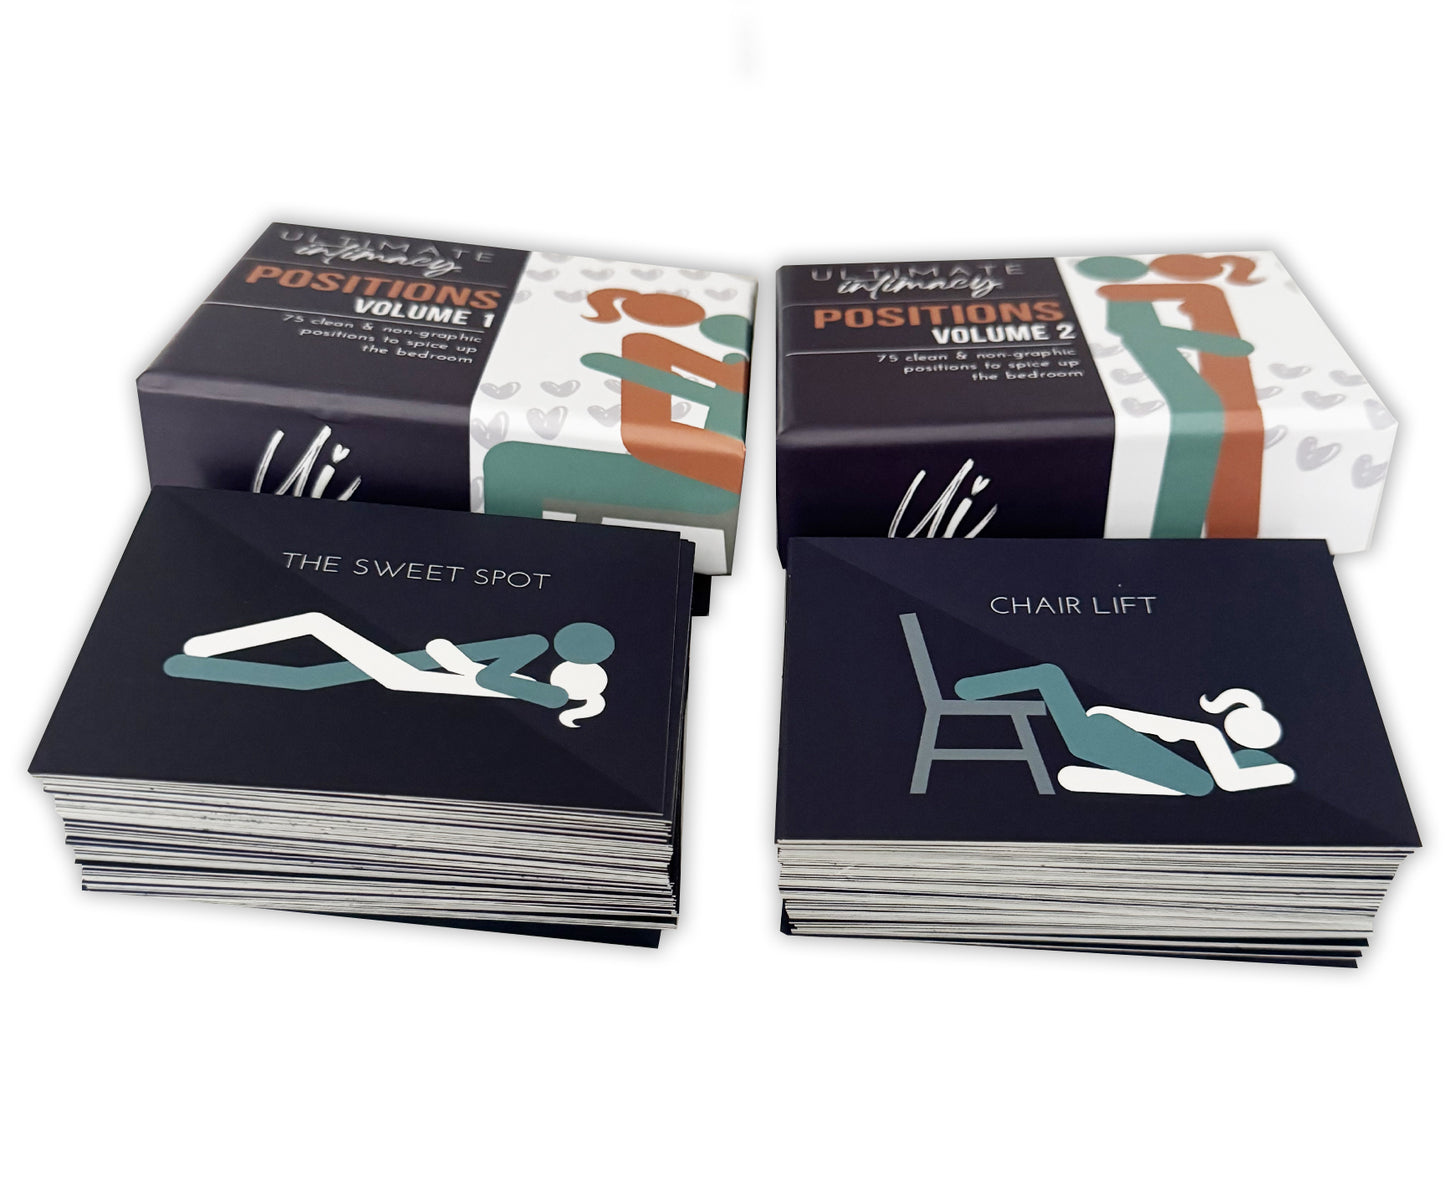 Sex Position Card Deck 2 Pack - Volumes 1 and 2, non-graphic with instructions